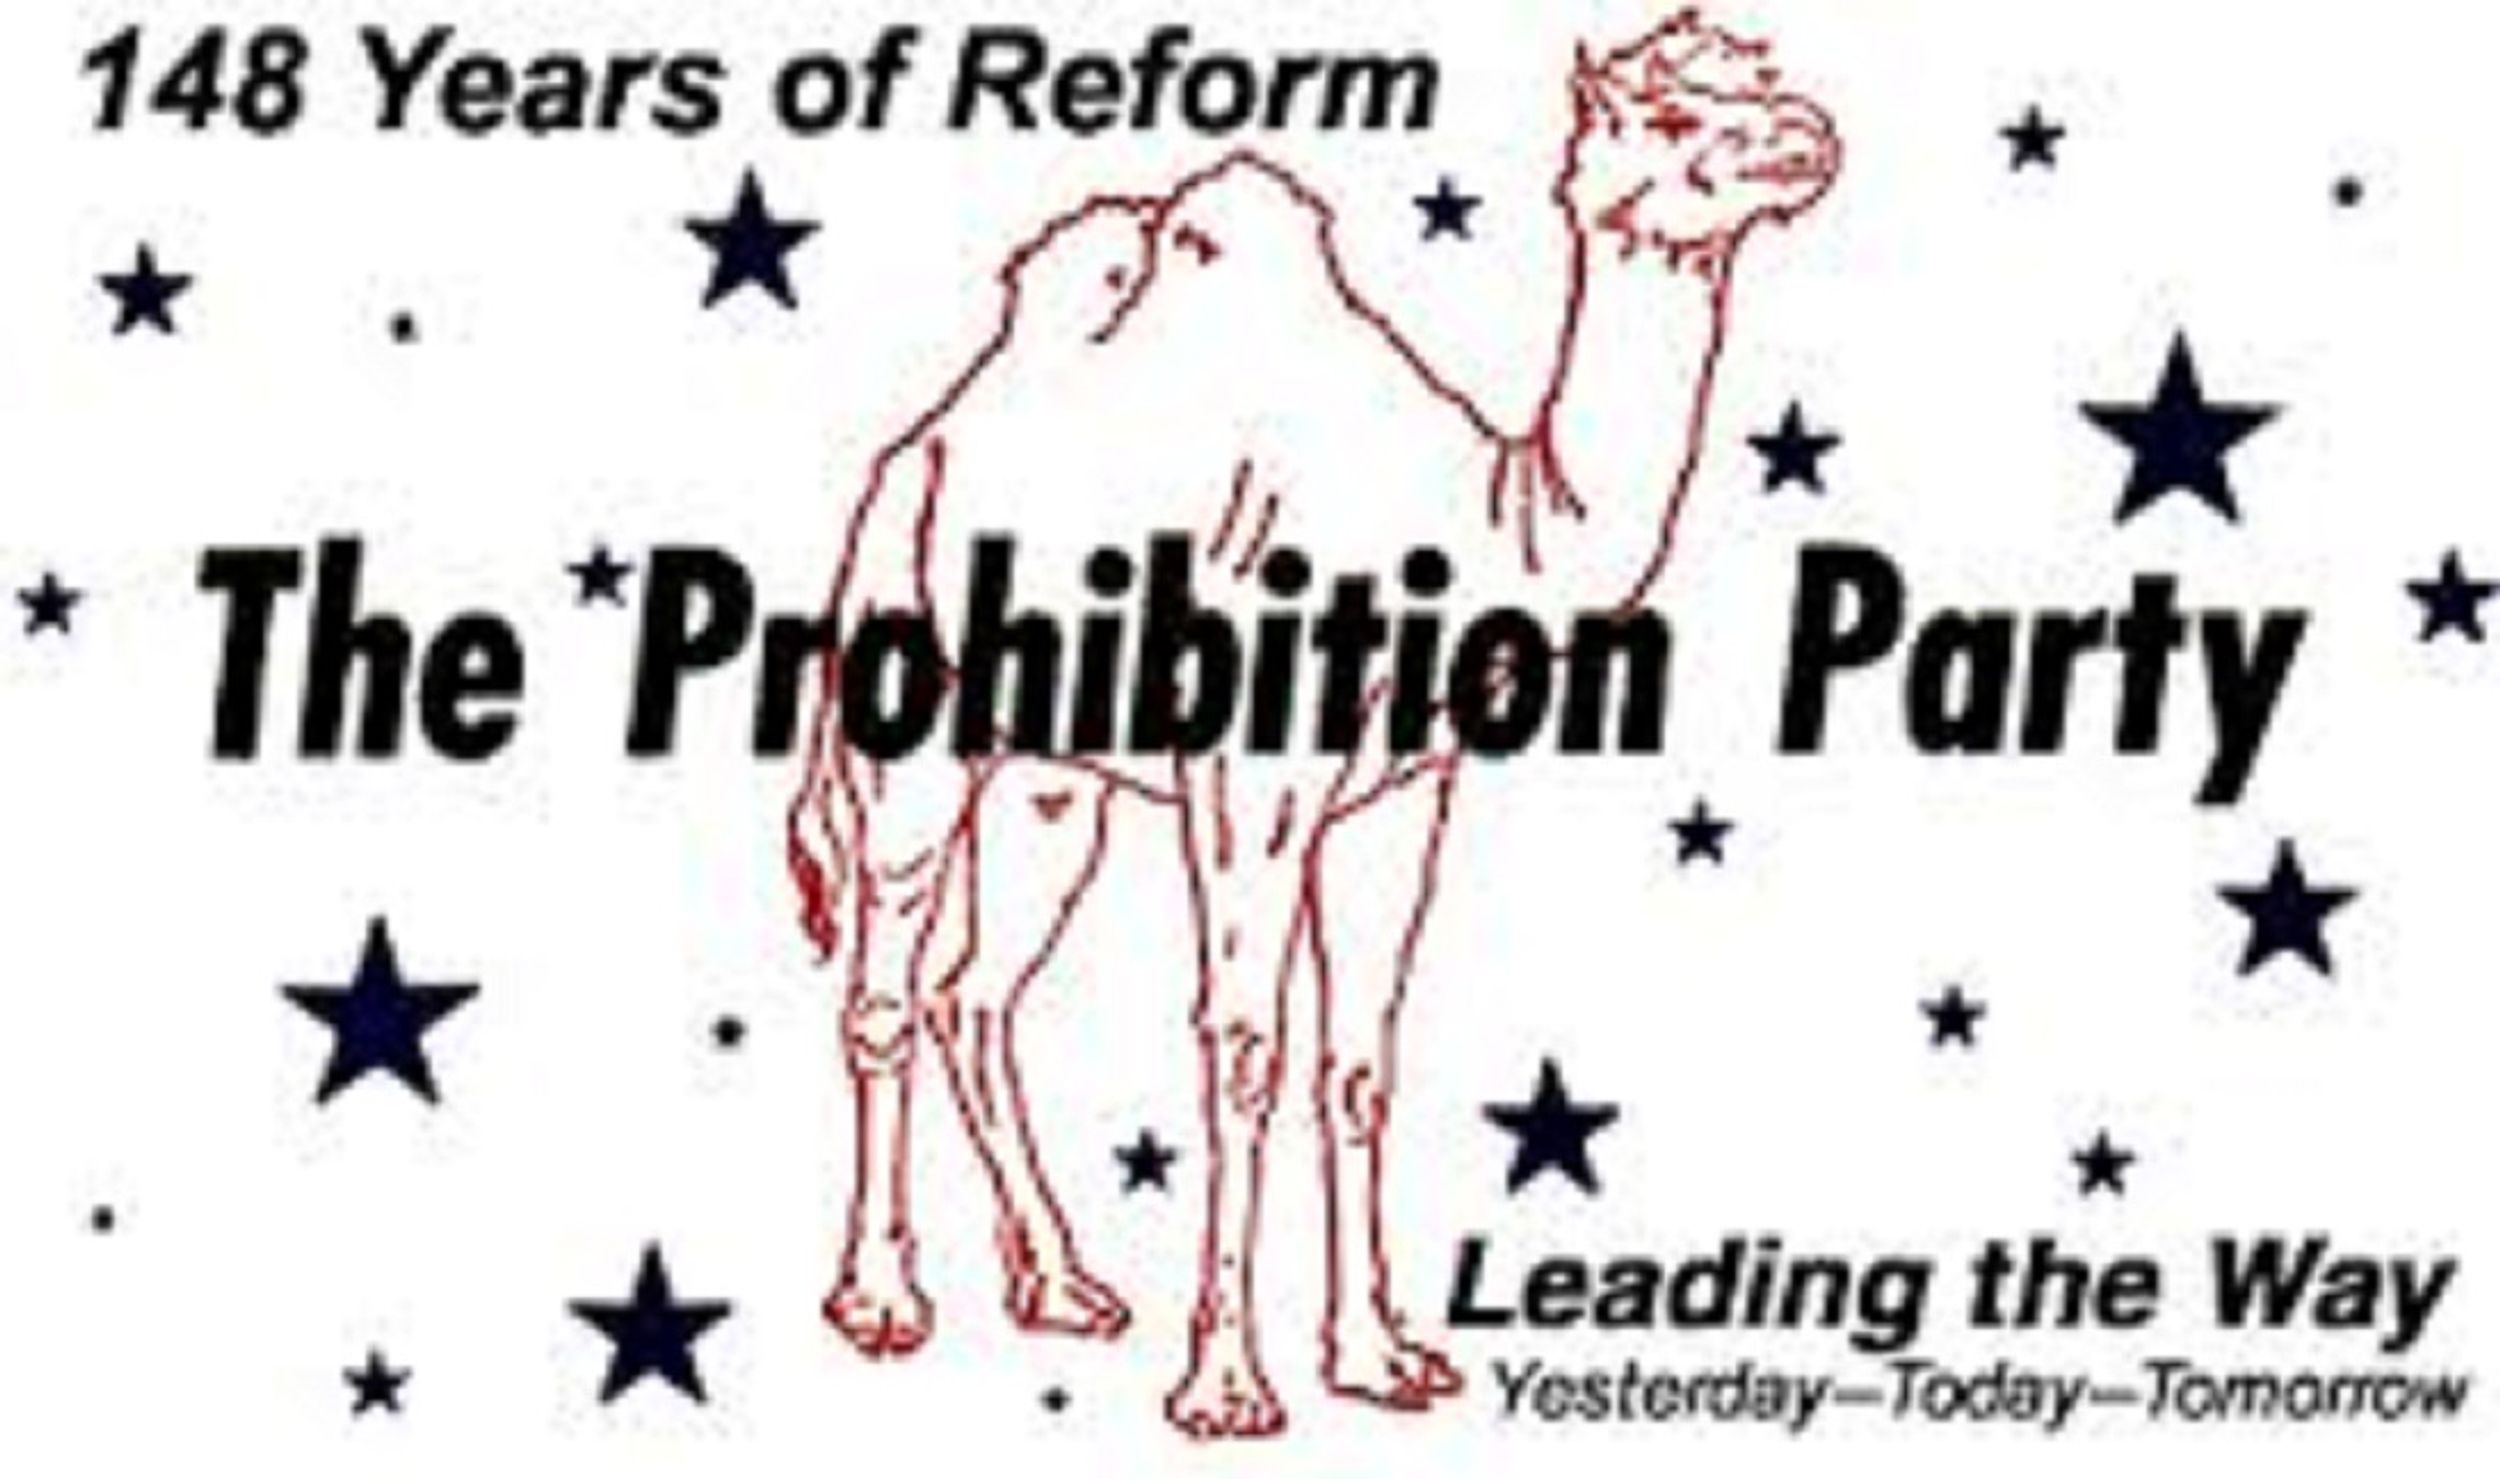 Prohibition Party Gaining Momentum In 2017